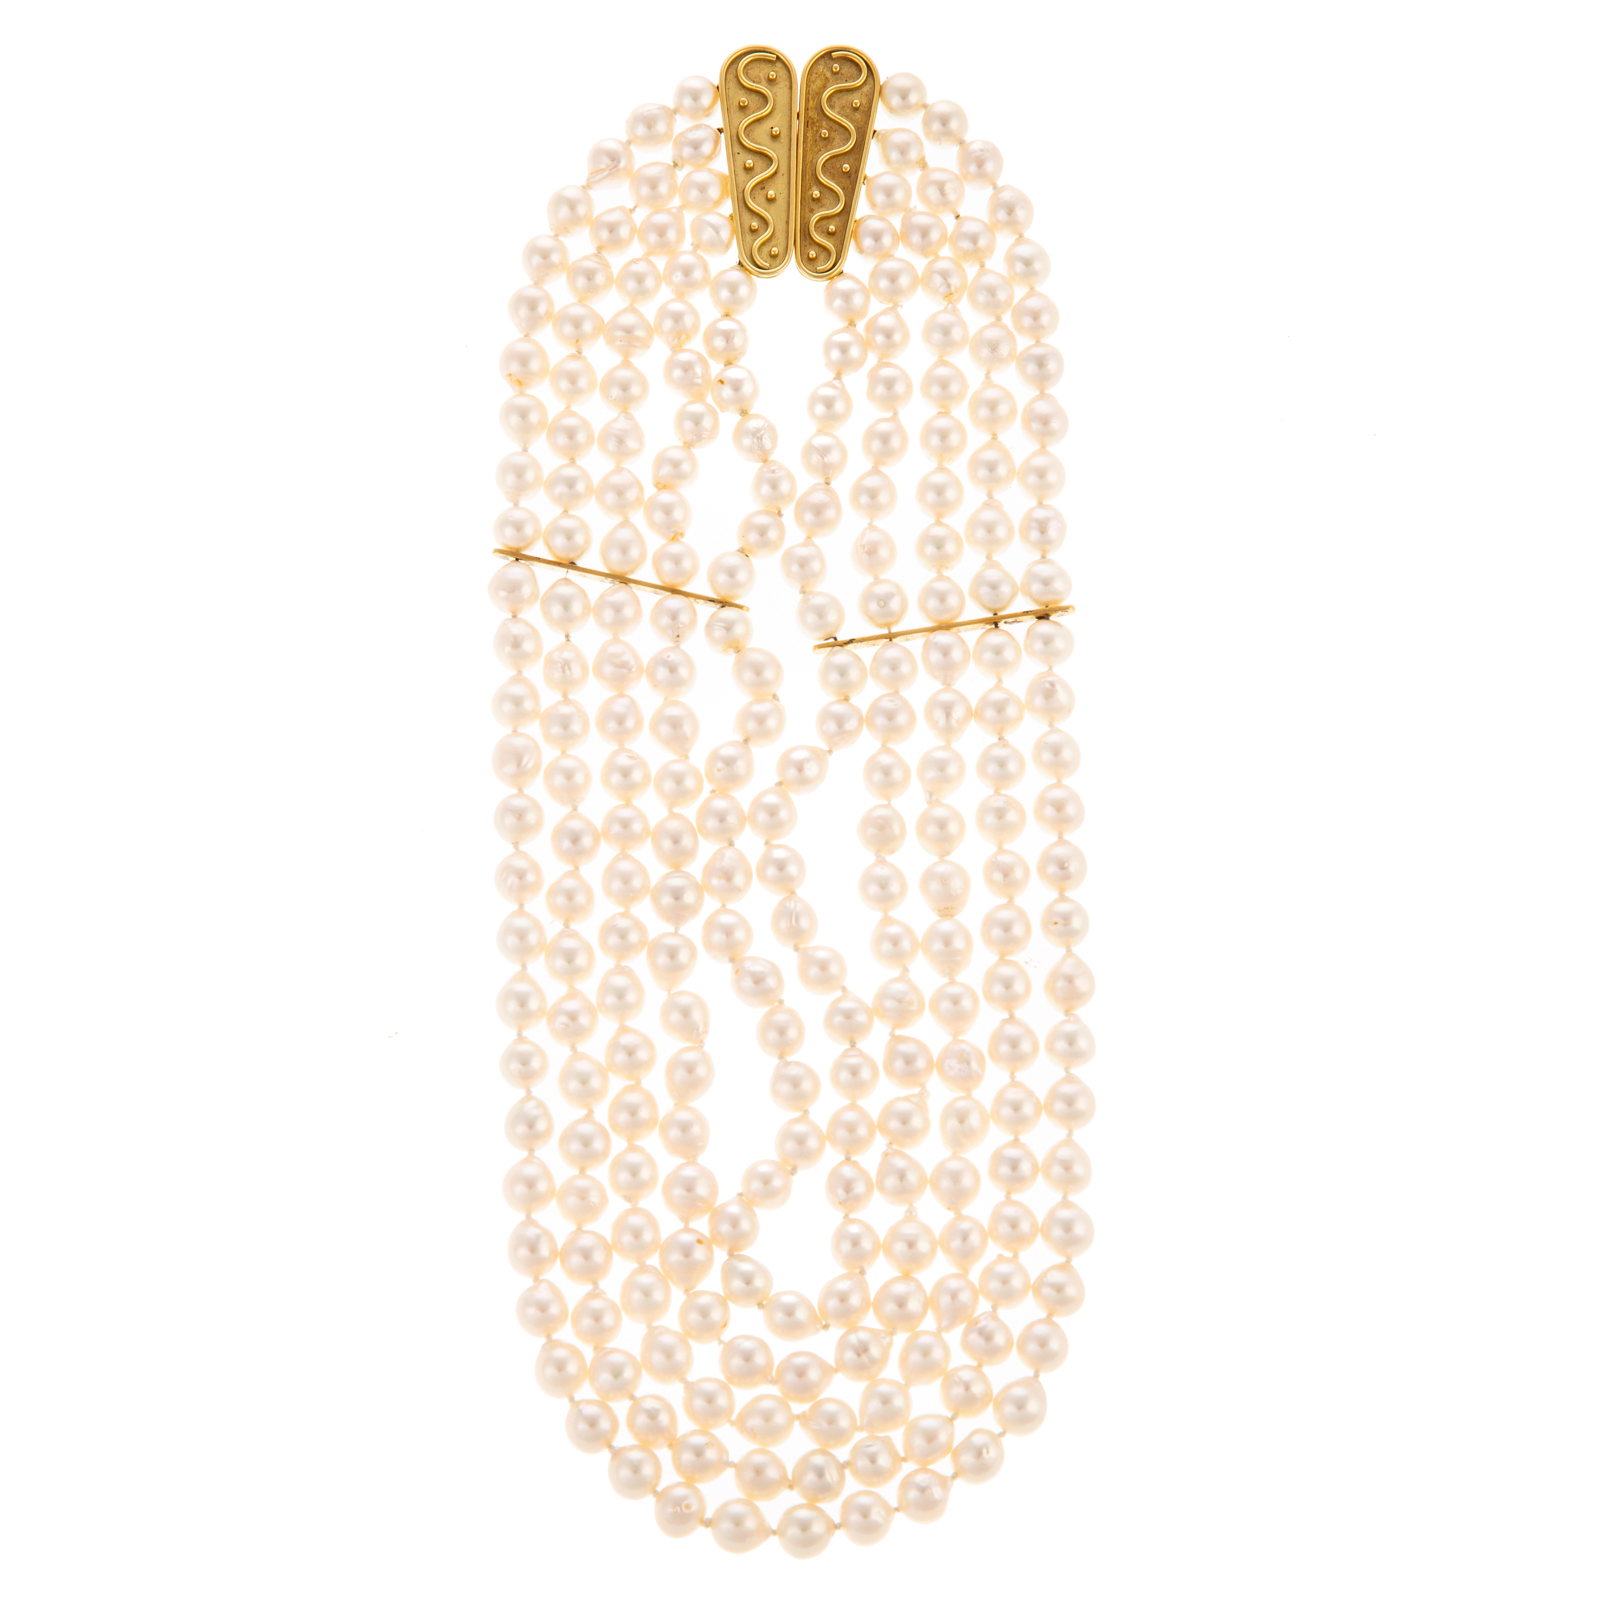 A FIVE STRAND BAROQUE PEARL NECKLACE 33851a